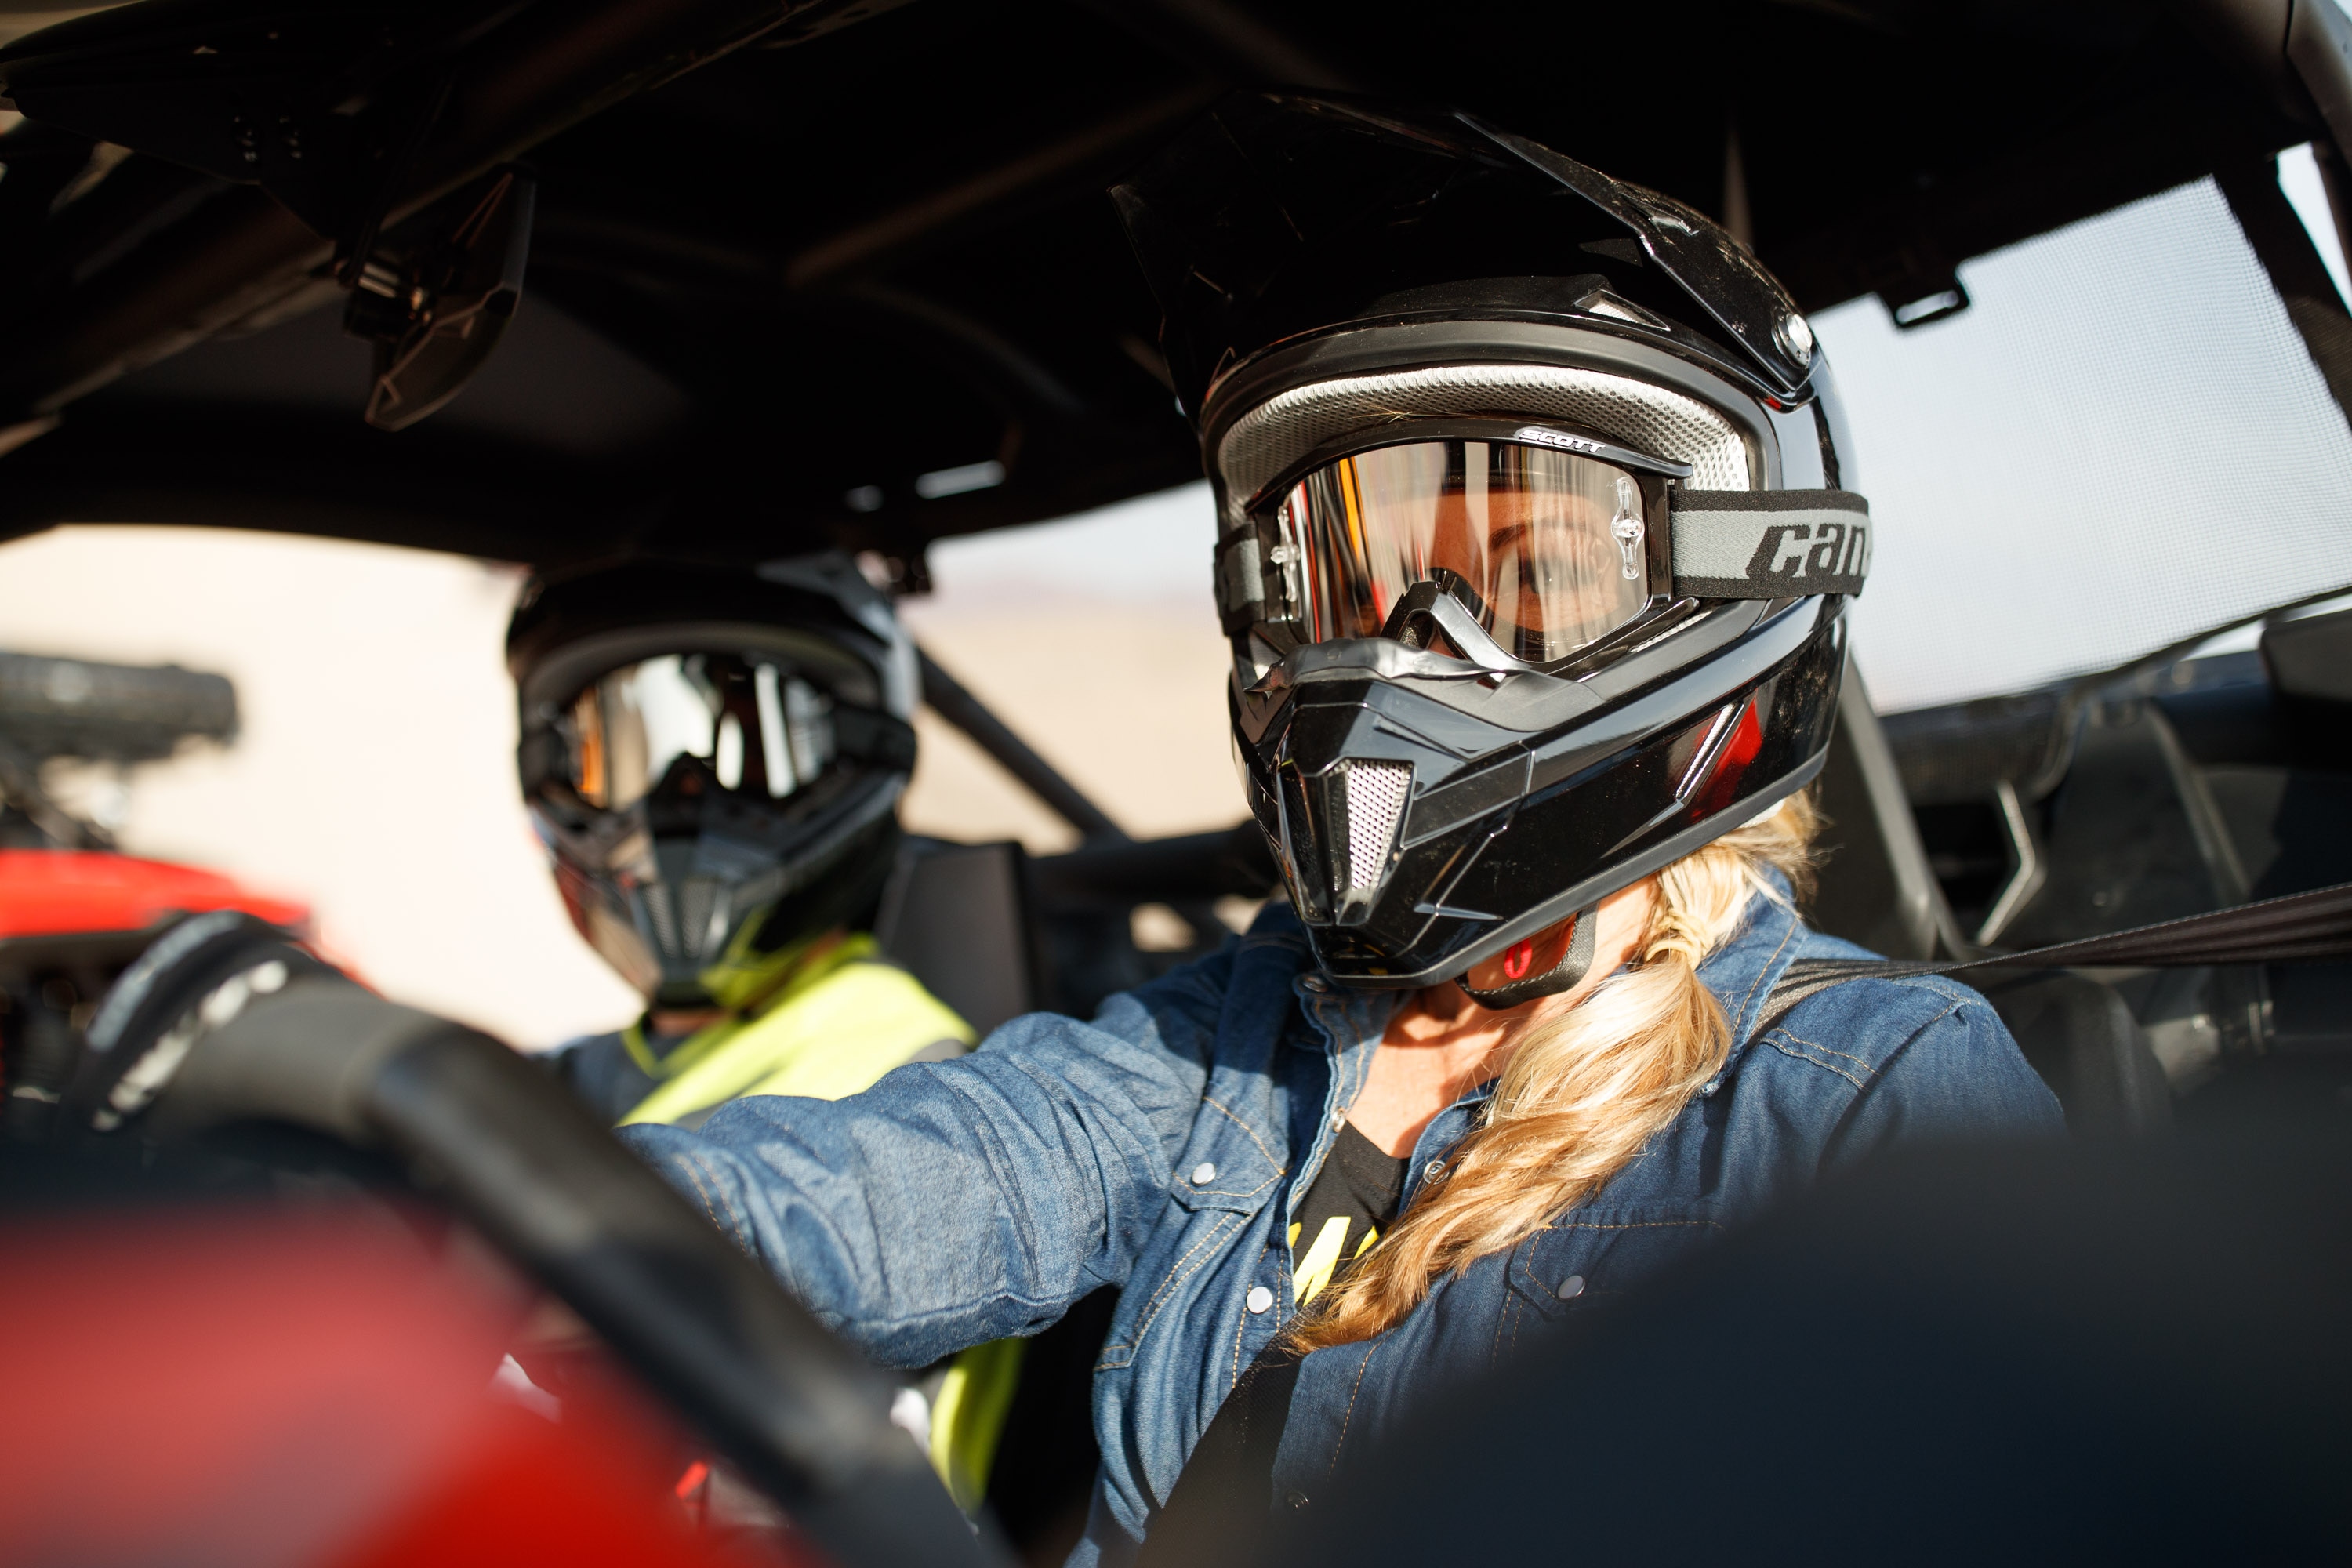 A woman riding a Can-Am side-by-side with Can-Am helmet and goggles